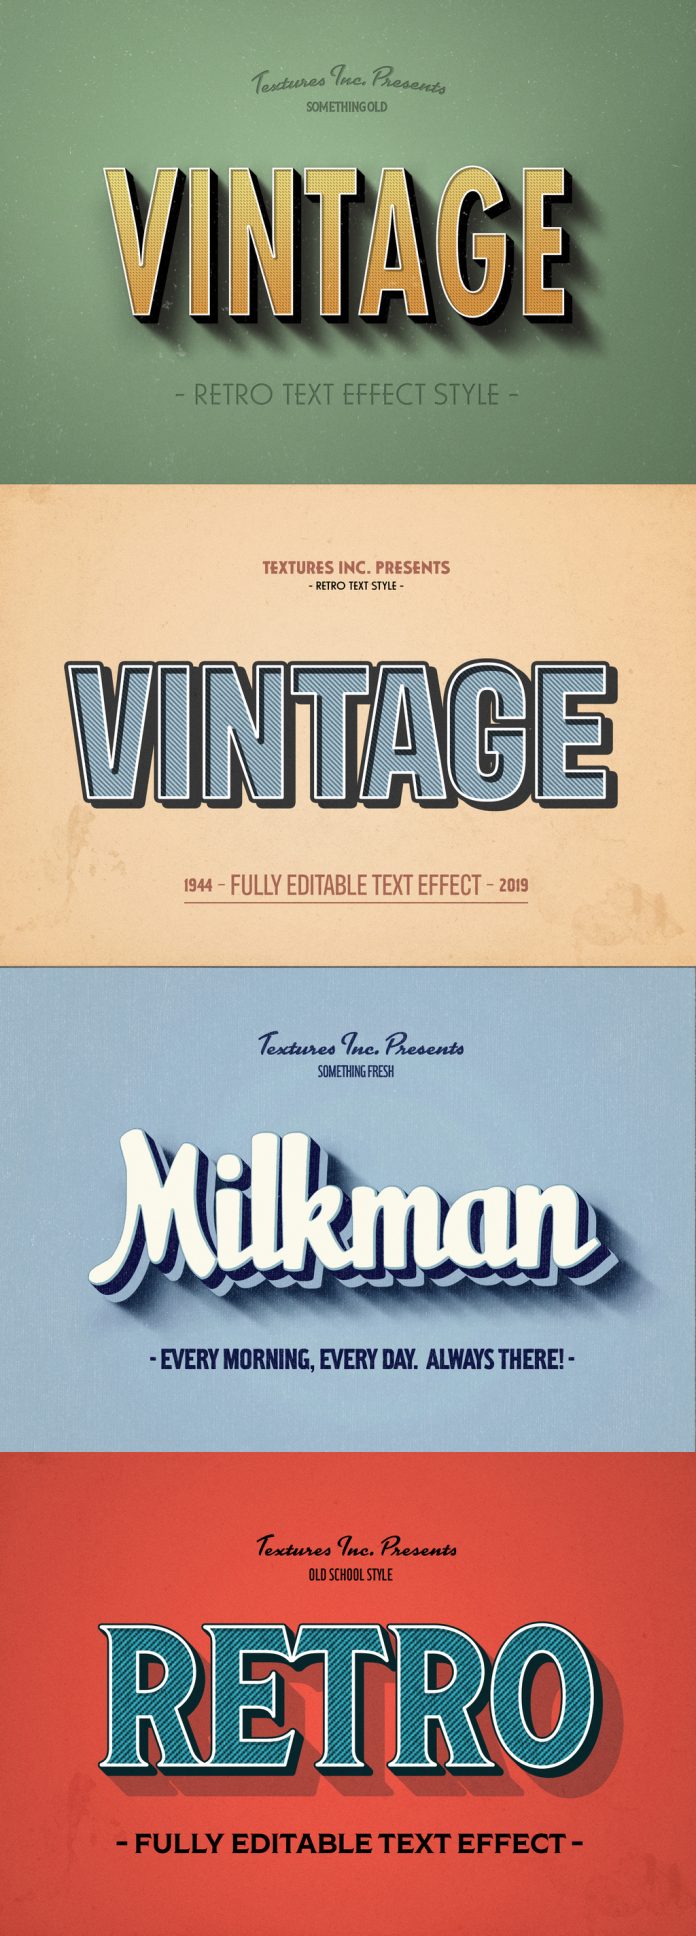 Vintage Text Effects for Adobe Photoshop.